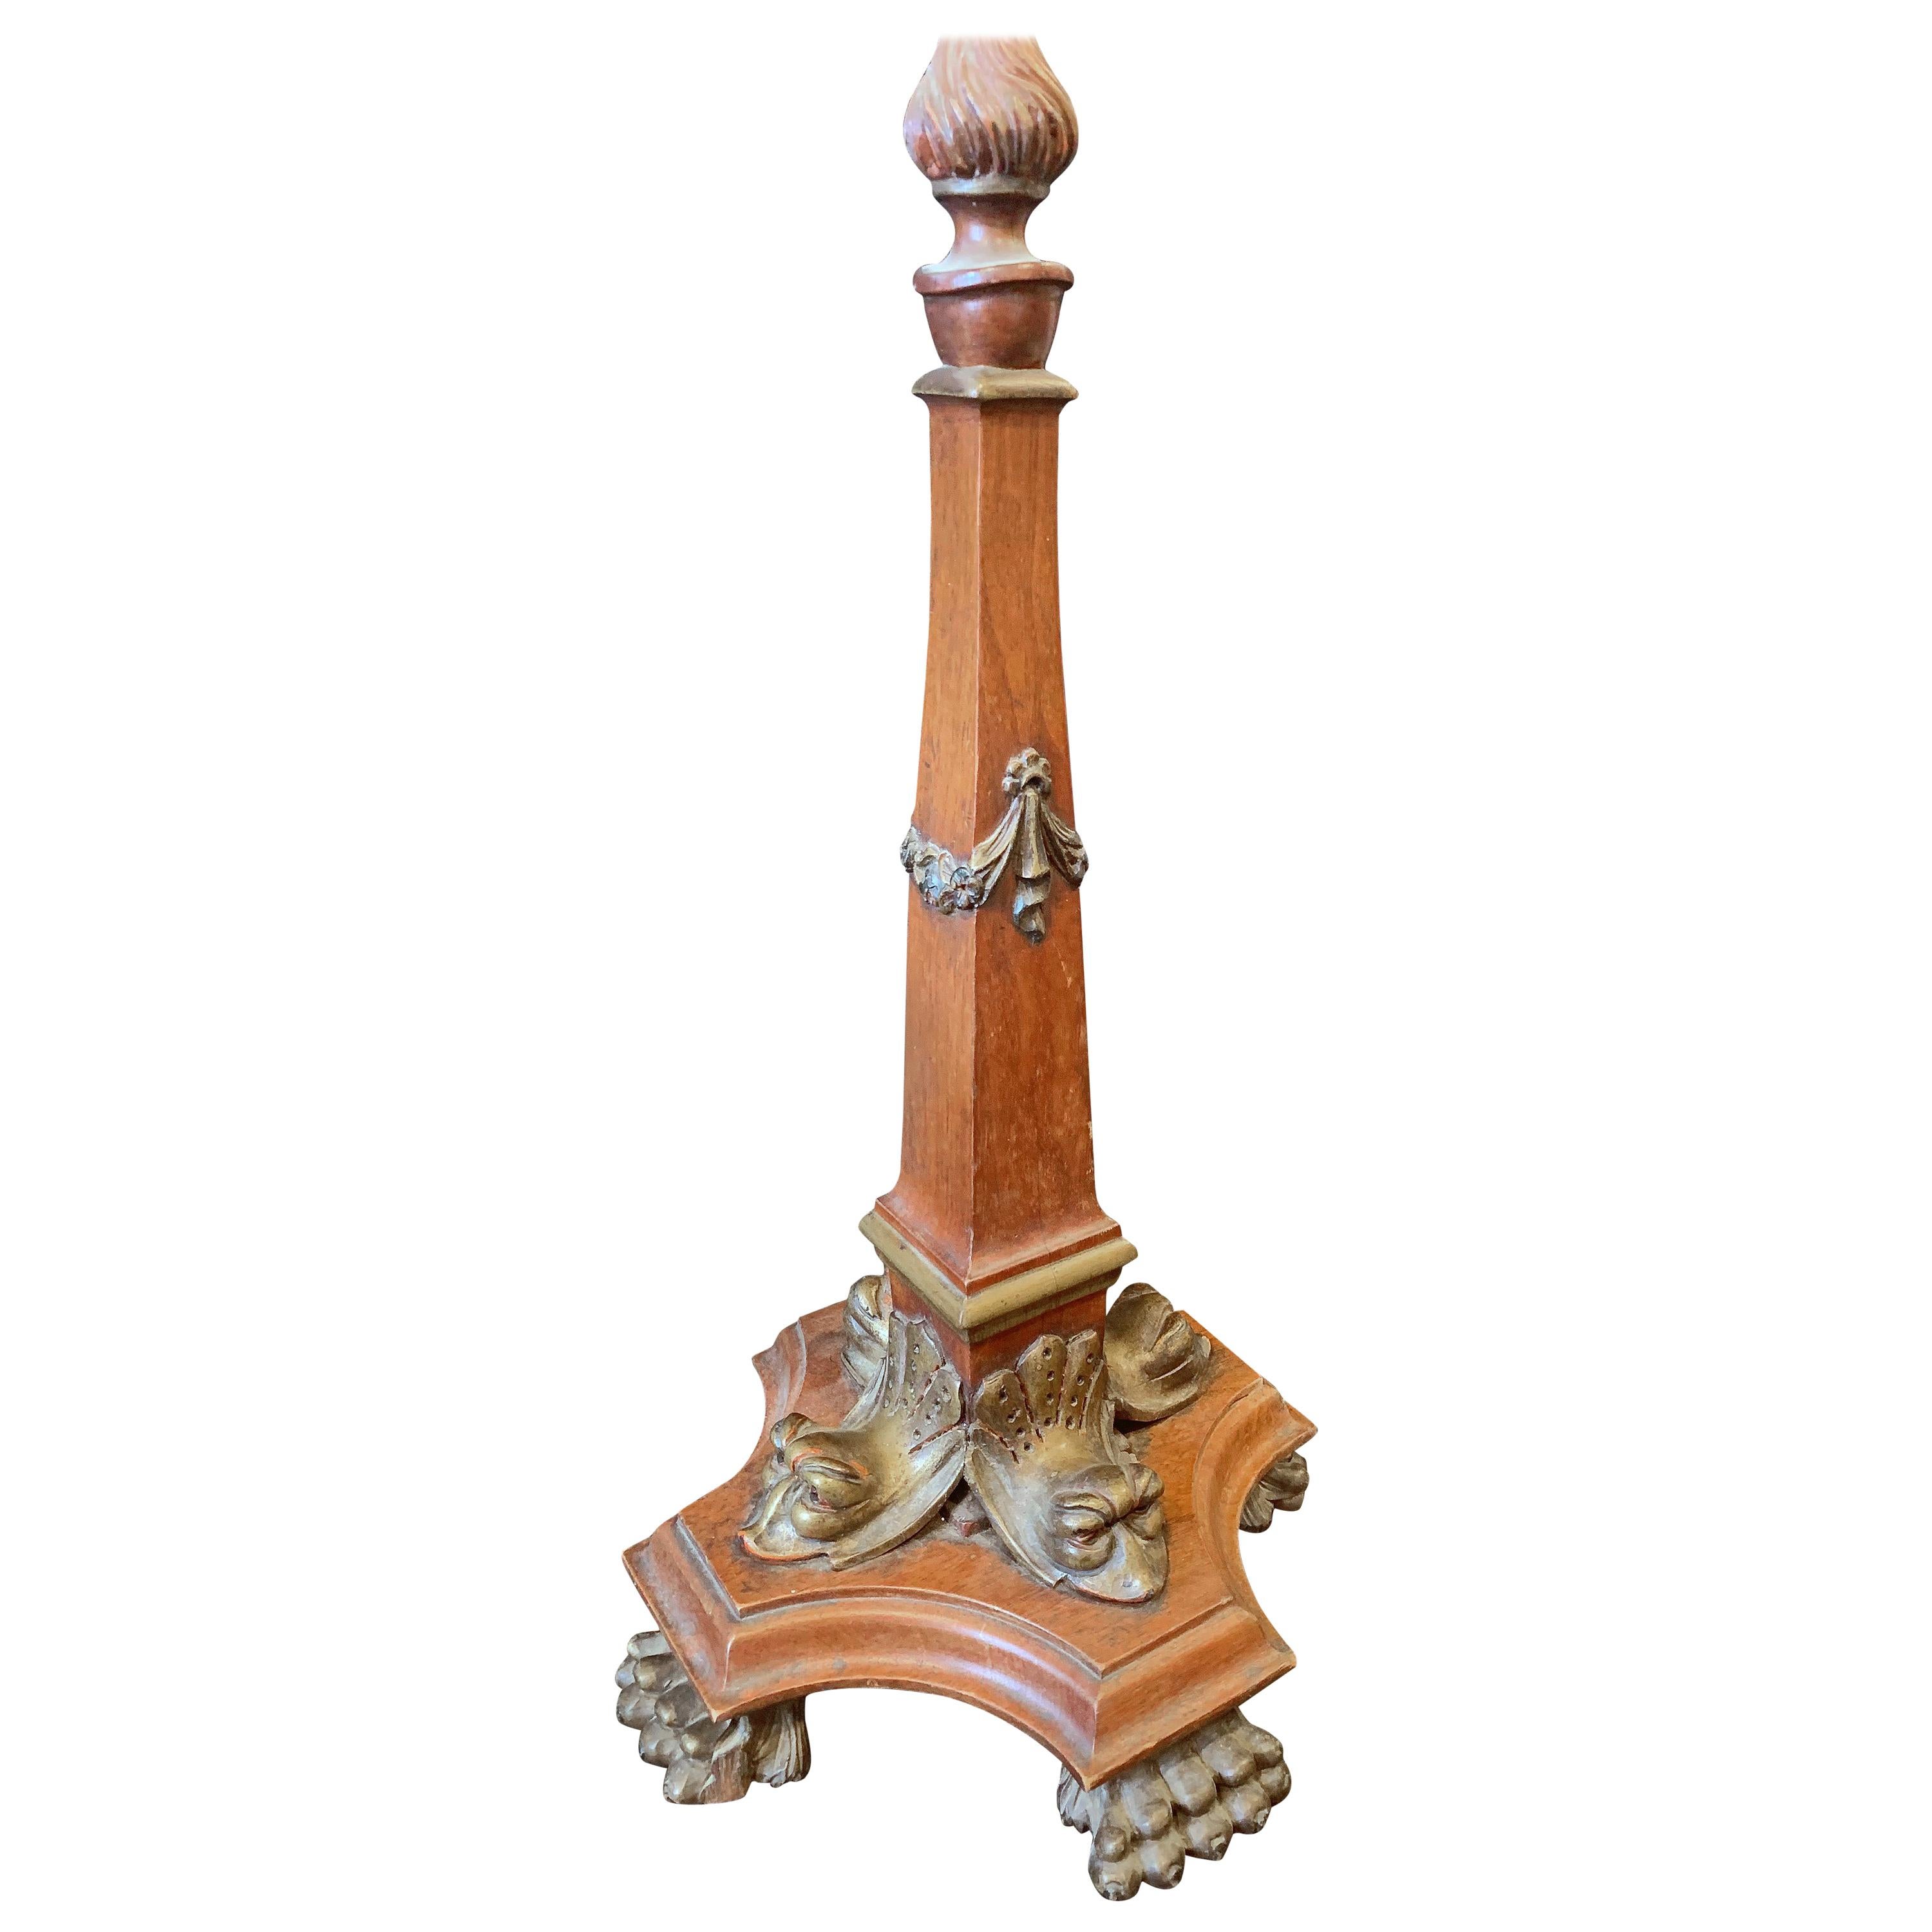 Slender Renaissance Revival Lamp Base with Dauphins and Hairy Paw Feet